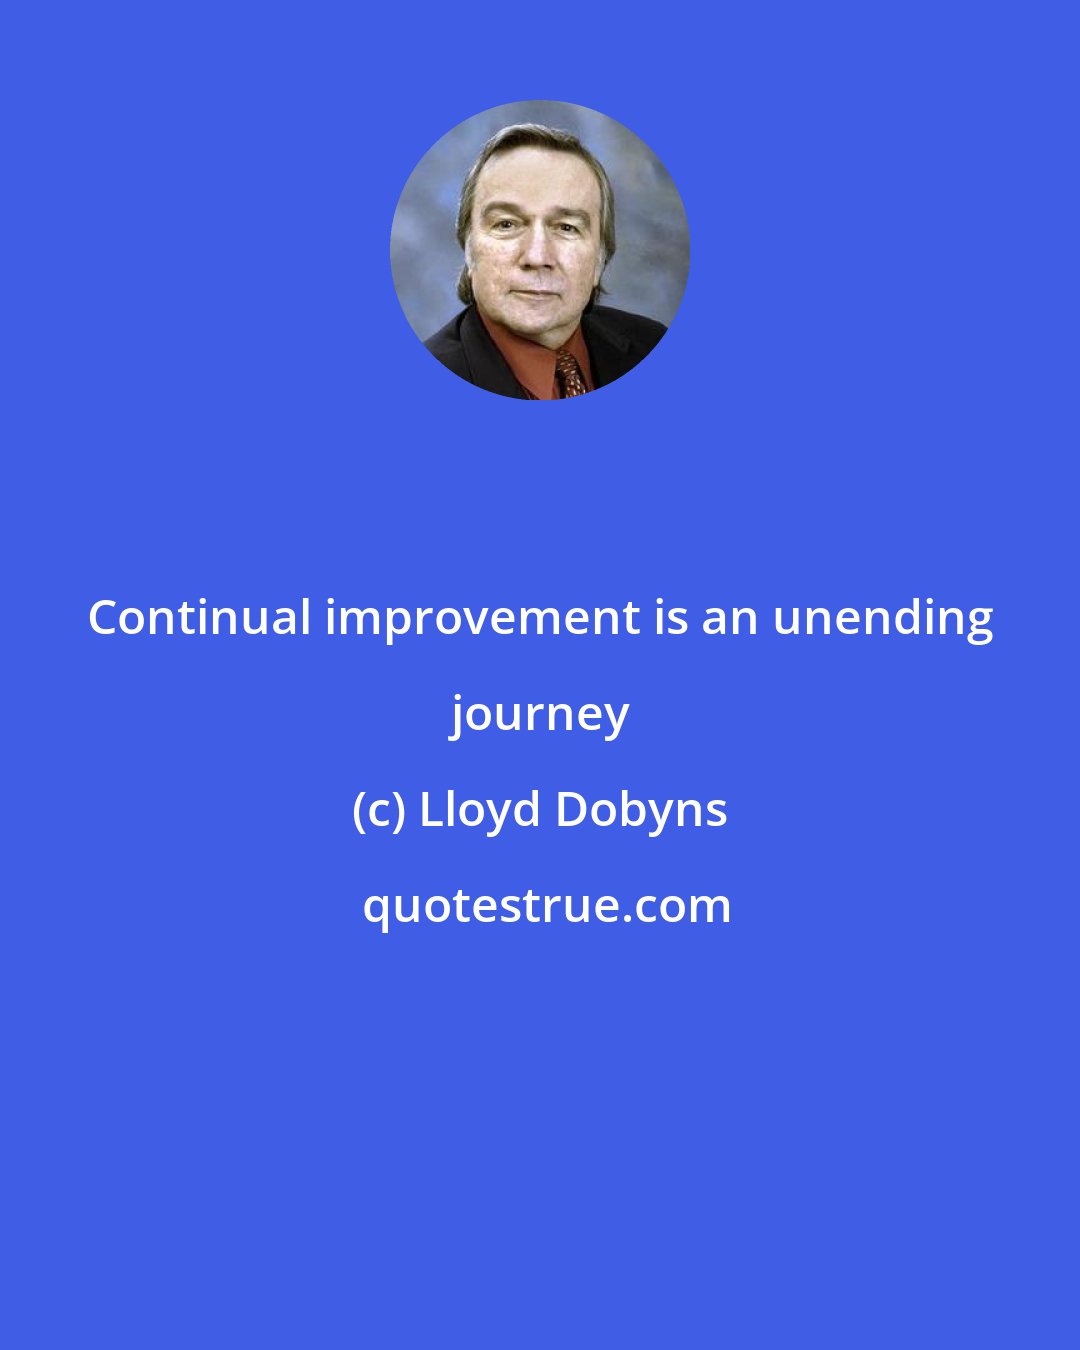 Lloyd Dobyns: Continual improvement is an unending journey